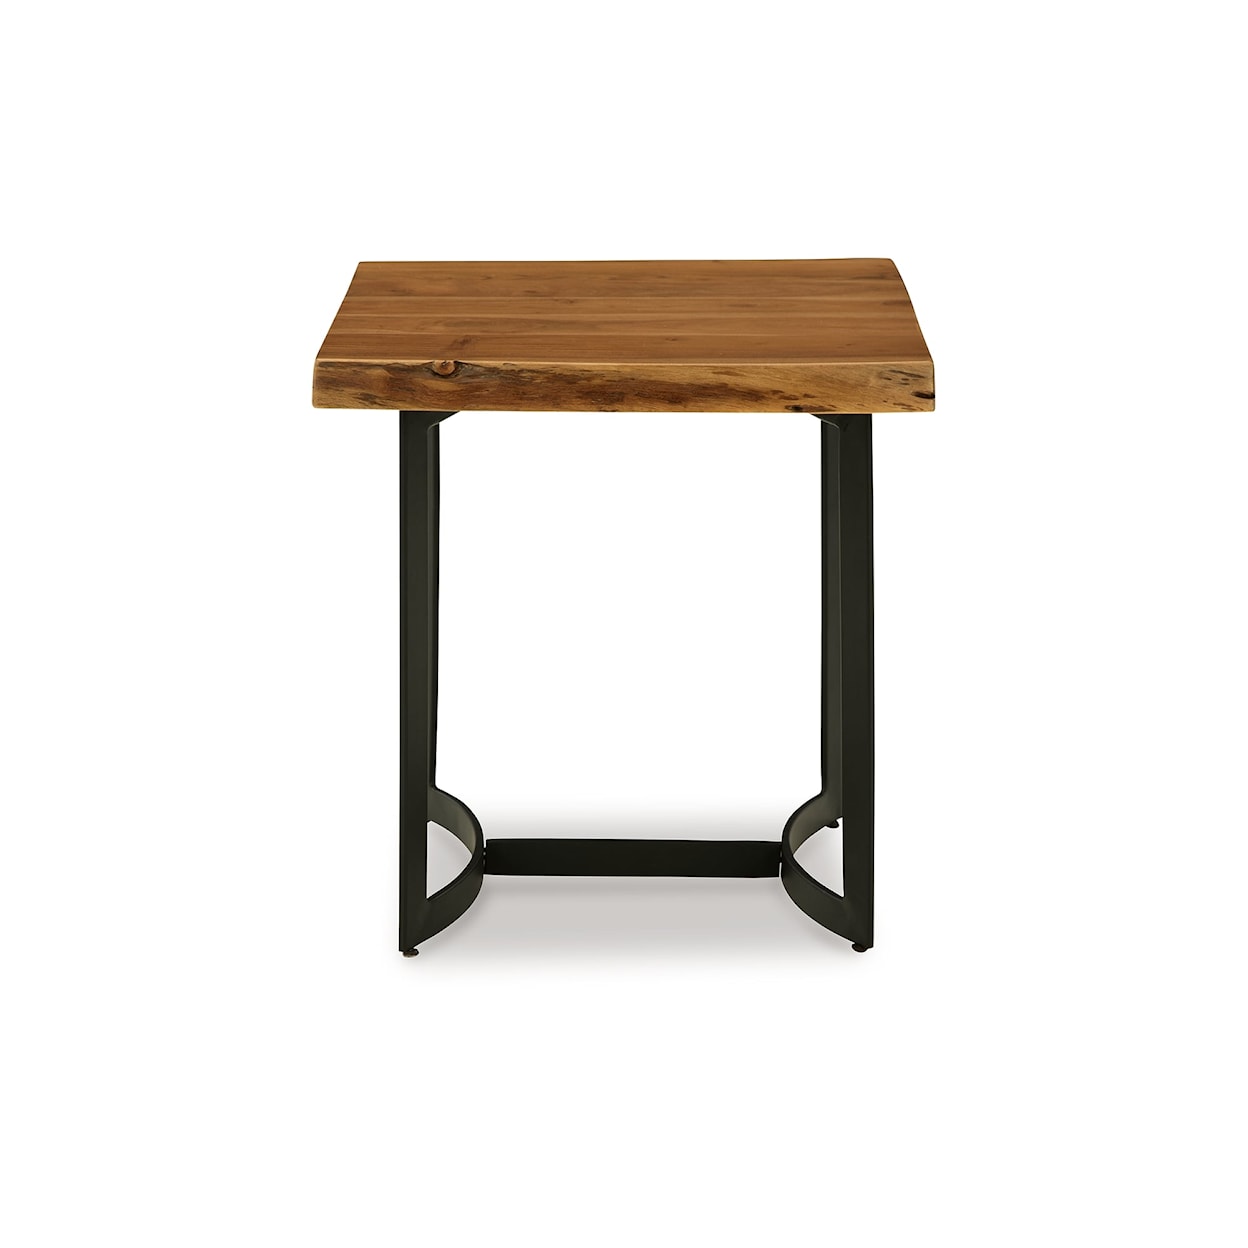 Benchcraft Fortmaine Rectangular End Table